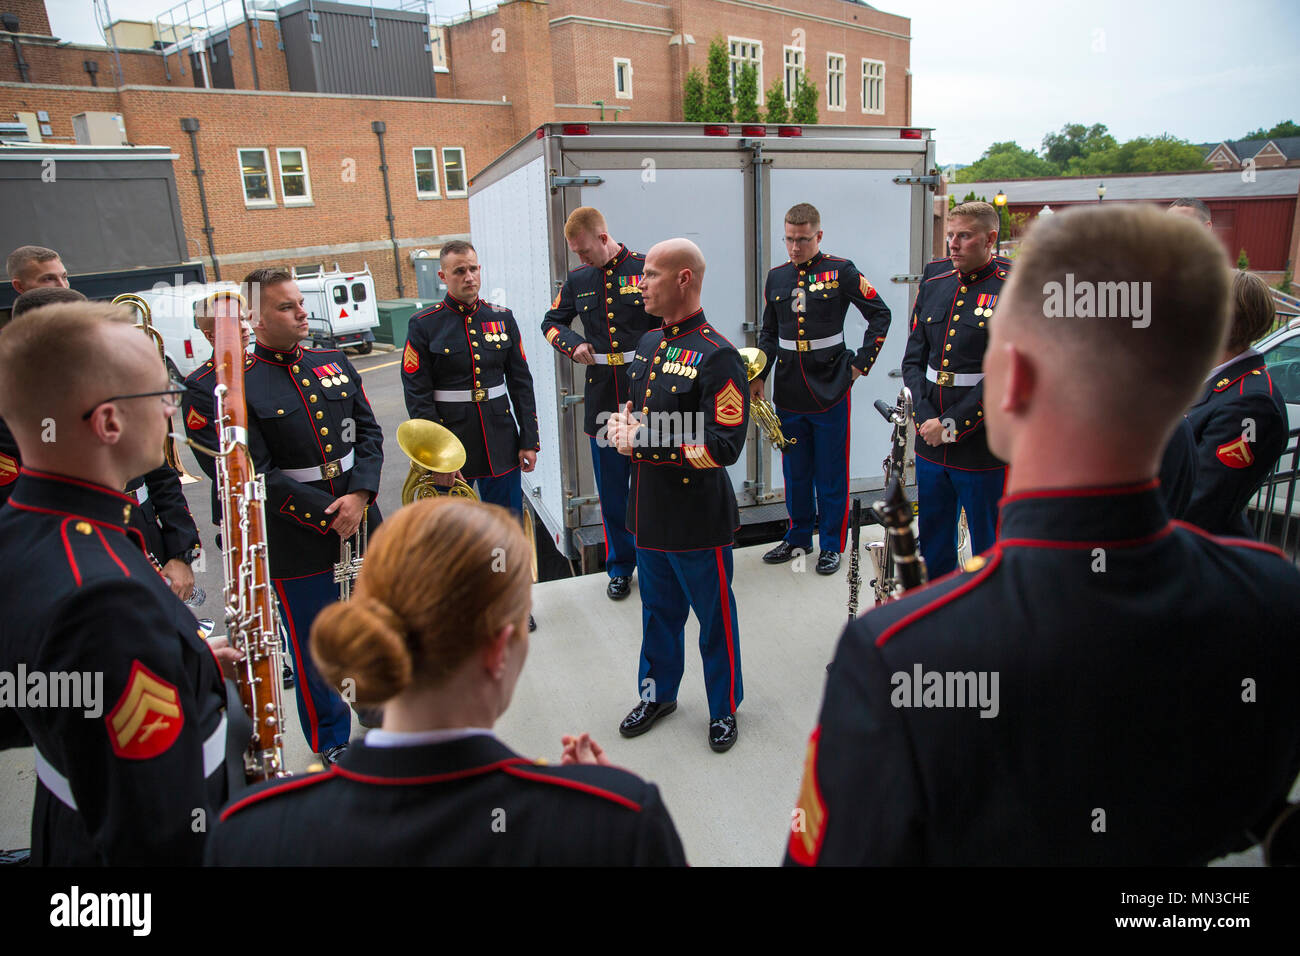 U.S. Marines with the Quantico Marine Band perform for a concert held at Roanoke College, Salem, Va. Aug. 28, 2017. The concert was part of a free annual summer concert series. (U.S. Marine Corps photo by Lance Cpl. Cristian L. Ricardo) Stock Photo